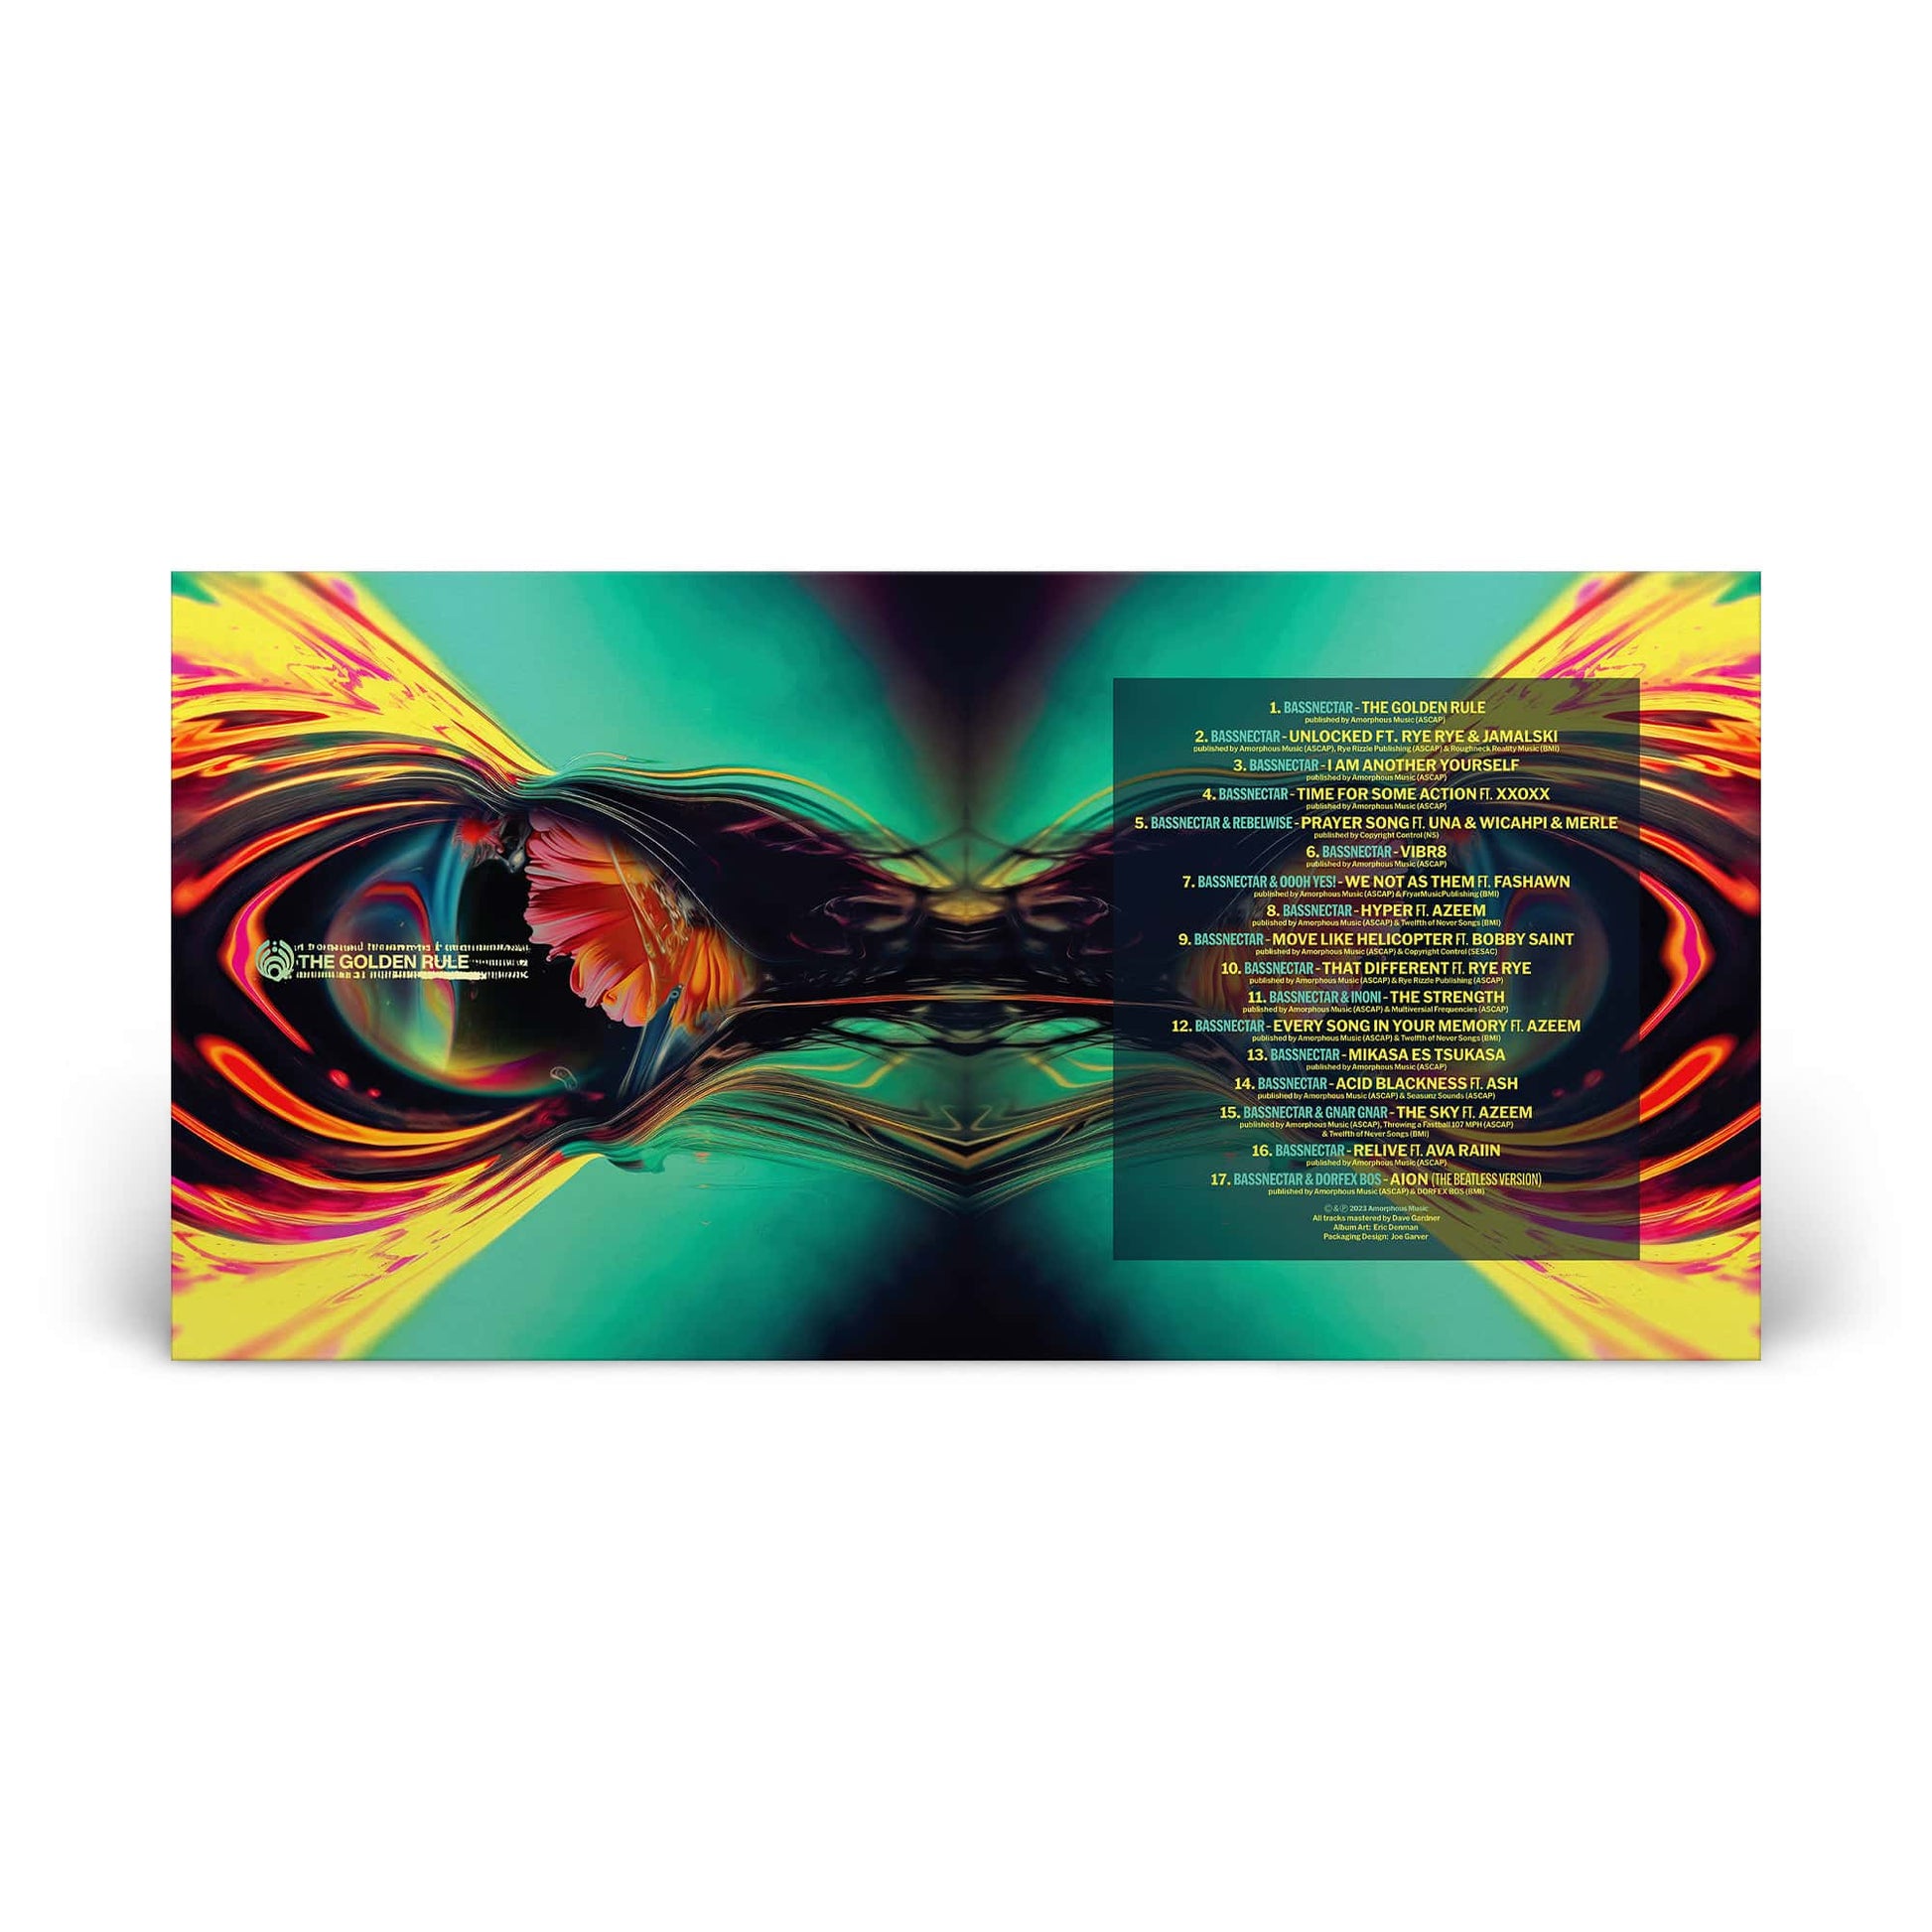 The Golden Rule Limited Edition Vinyl Bassnectar The Other Side